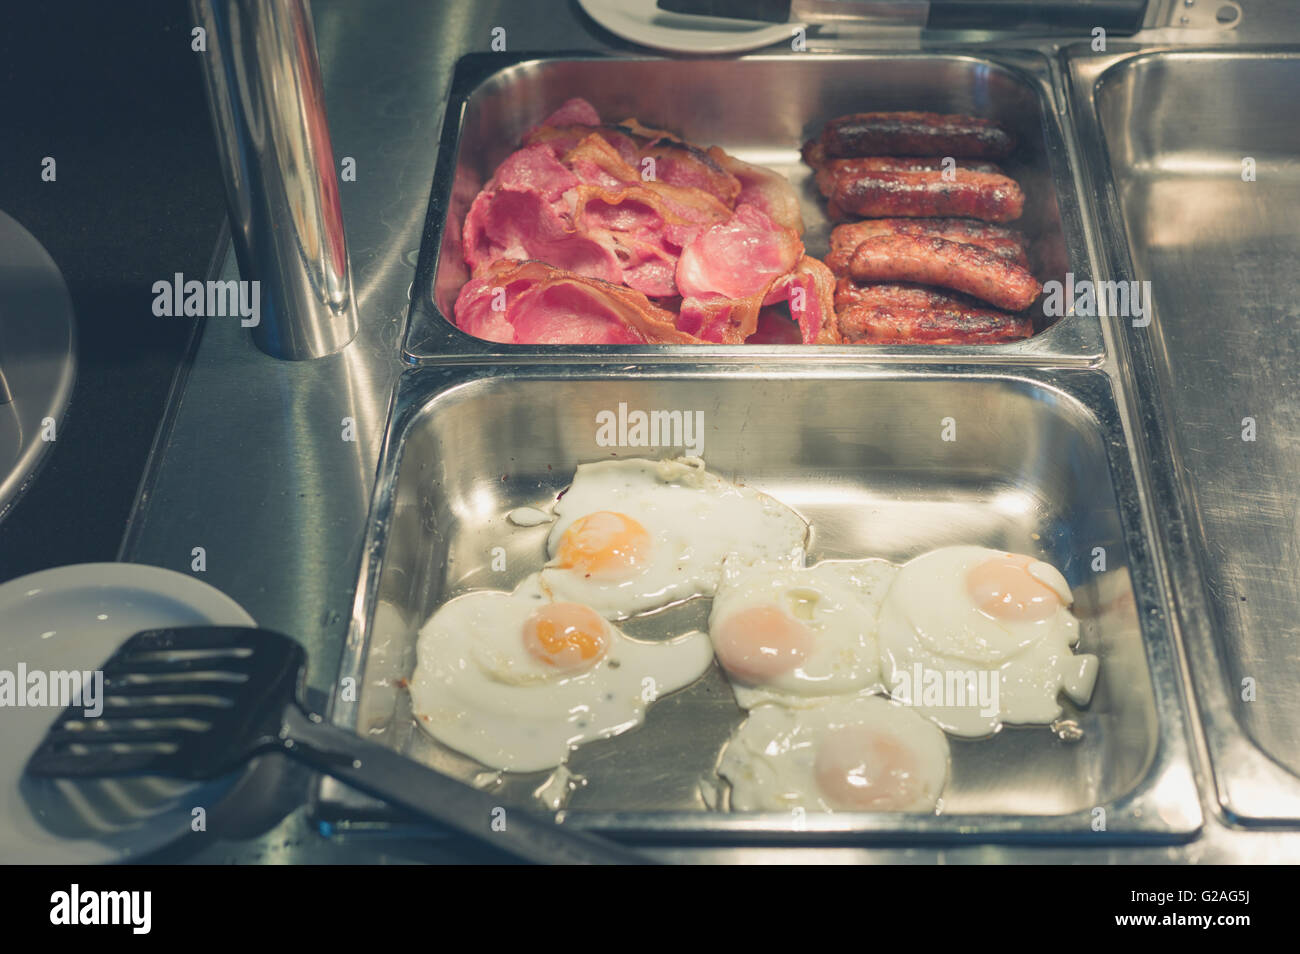 https://c8.alamy.com/comp/G2AG5J/trays-with-bacon-and-eggs-at-a-breakfast-buffet-G2AG5J.jpg